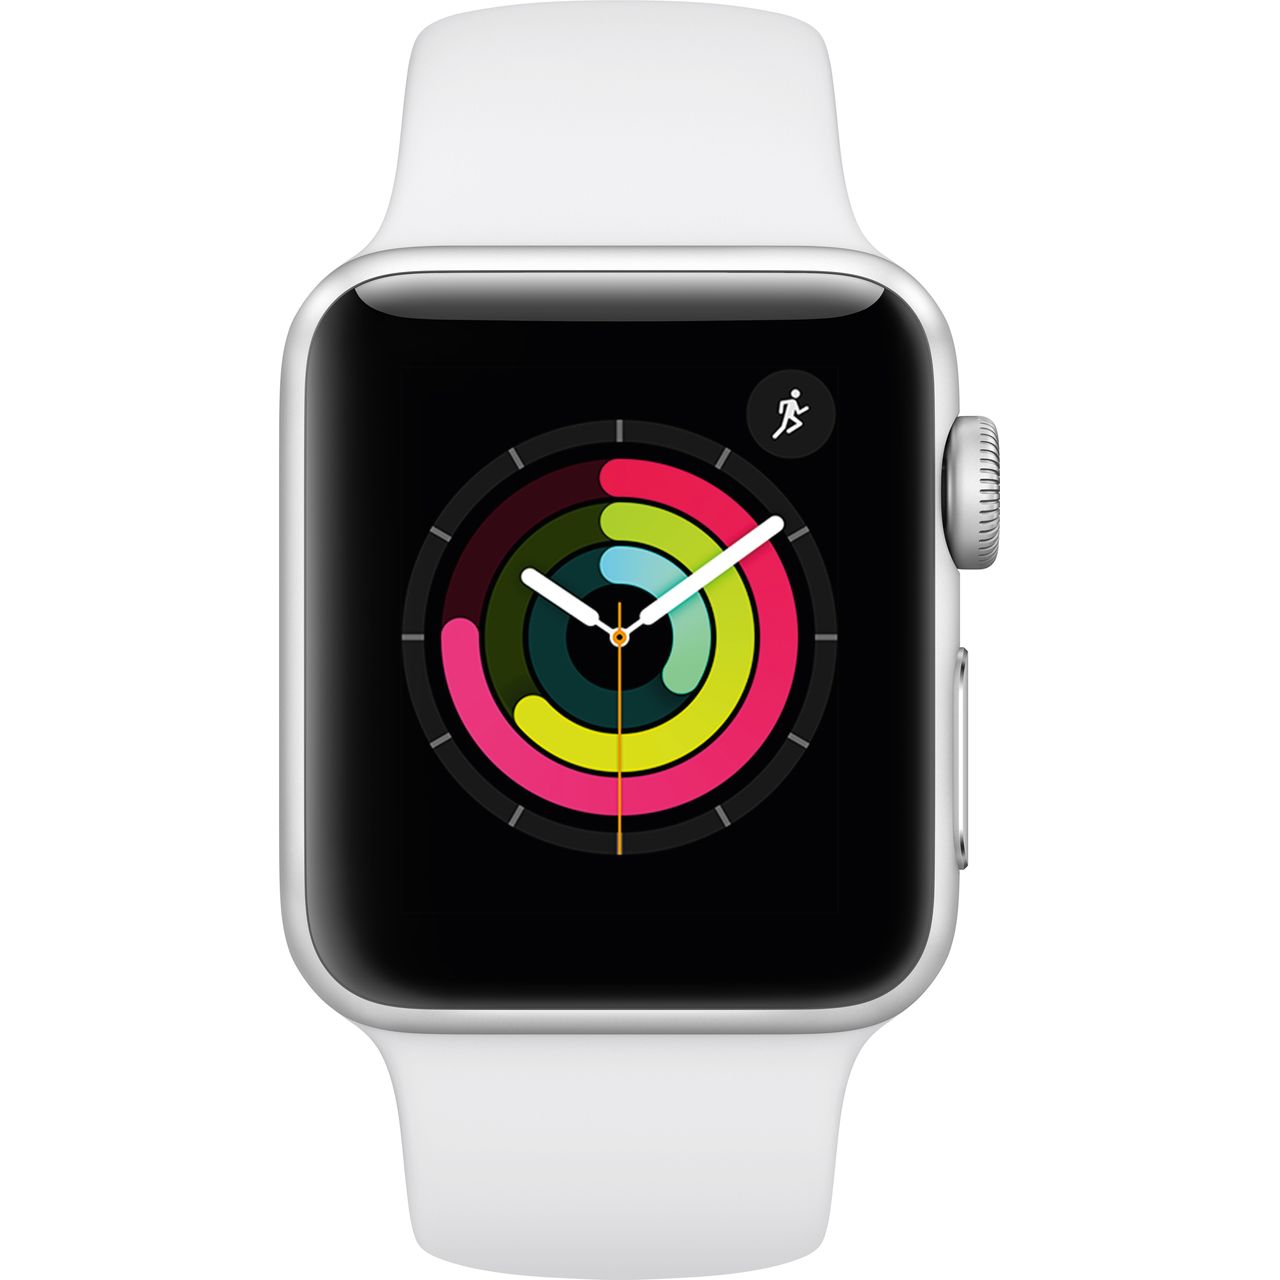 Apple Watch Series 3, 38mm, GPS [2017] Review